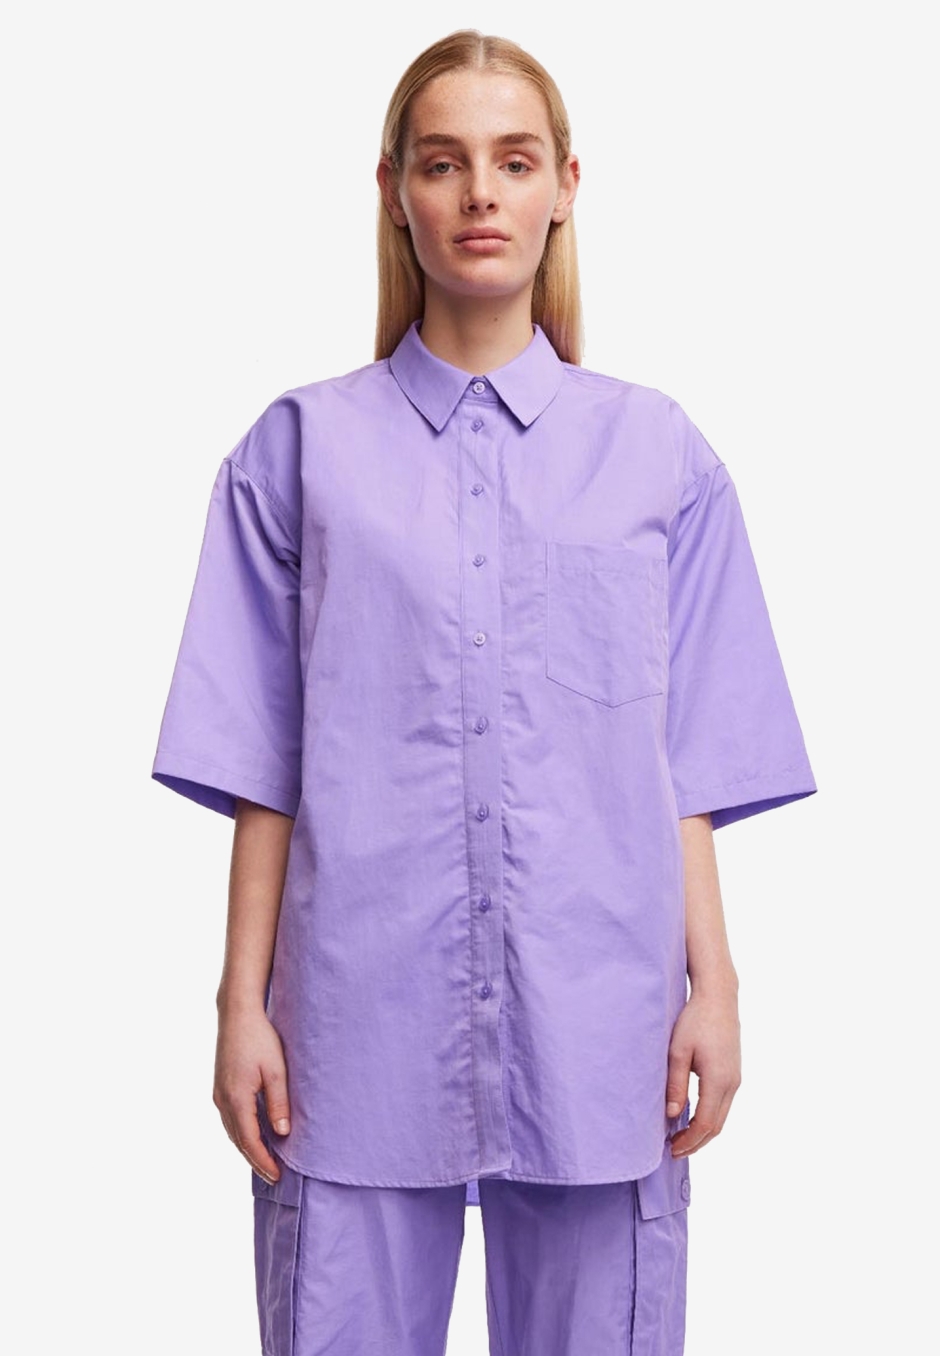 Oval Square Work Shirt